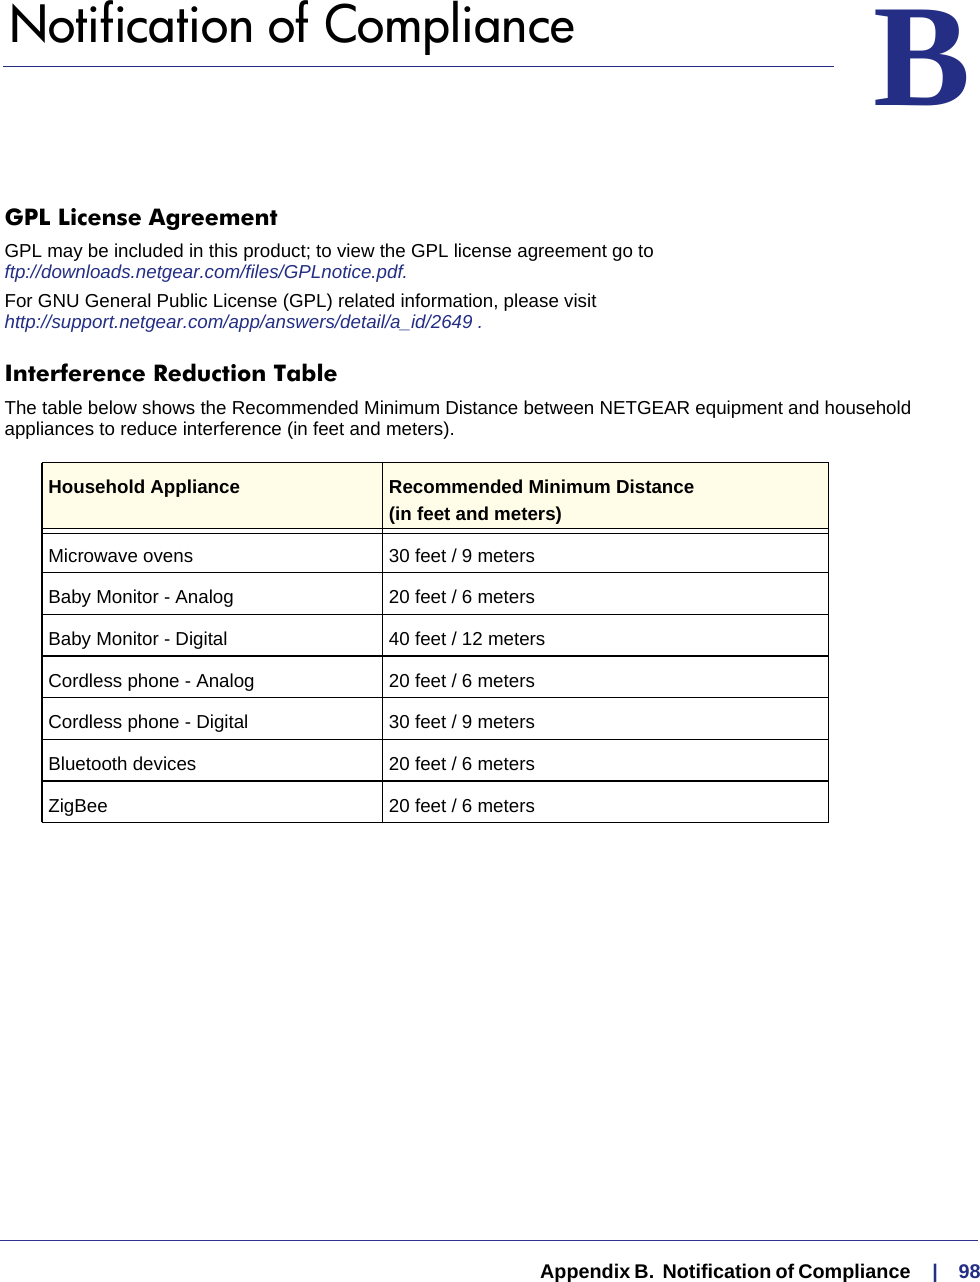   Appendix B.  Notification of Compliance     |    98BB.   Notification of ComplianceGPL License AgreementGPL may be included in this product; to view the GPL license agreement go to ftp://downloads.netgear.com/files/GPLnotice.pdf. For GNU General Public License (GPL) related information, please visit http://support.netgear.com/app/answers/detail/a_id/2649 .Interference Reduction TableThe table below shows the Recommended Minimum Distance between NETGEAR equipment and household appliances to reduce interference (in feet and meters).Household Appliance Recommended Minimum Distance(in feet and meters) Microwave ovens 30 feet / 9 metersBaby Monitor - Analog 20 feet / 6 metersBaby Monitor - Digital 40 feet / 12 metersCordless phone - Analog 20 feet / 6 metersCordless phone - Digital 30 feet / 9 metersBluetooth devices 20 feet / 6 metersZigBee 20 feet / 6 meters